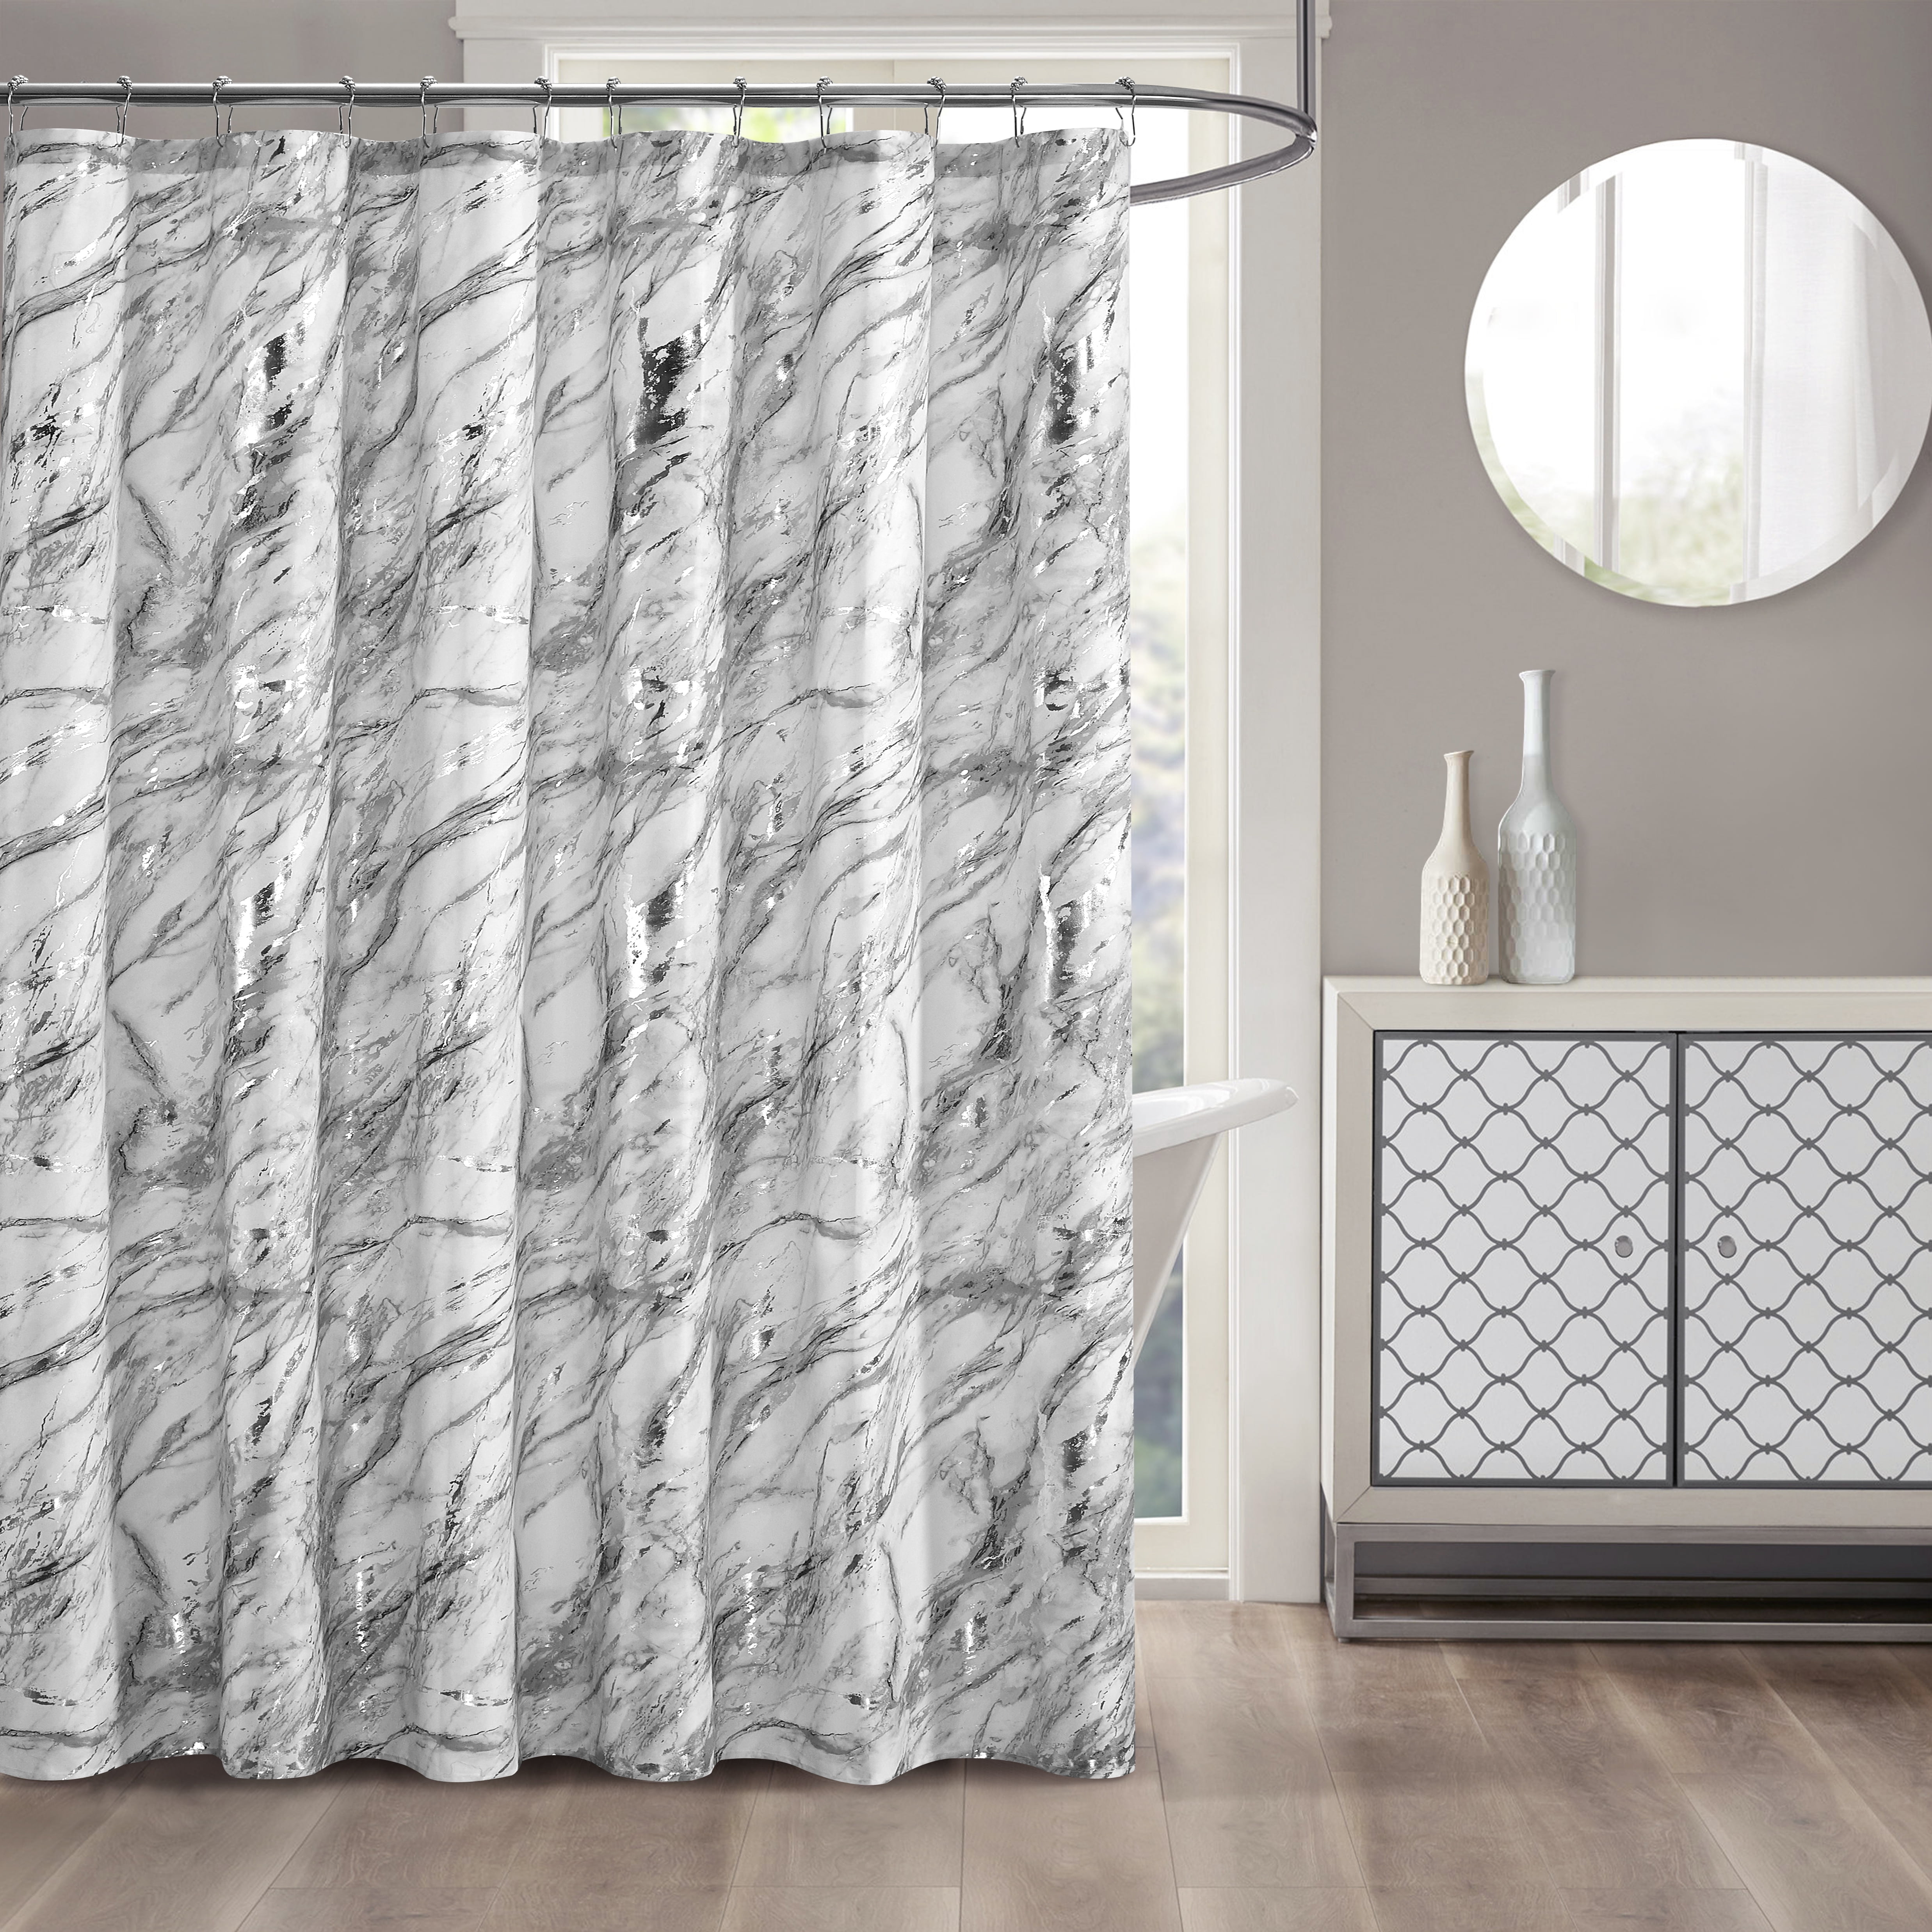 Shower Curtain Set Waterproof Fabric White Gray Marble Texture Background Design 